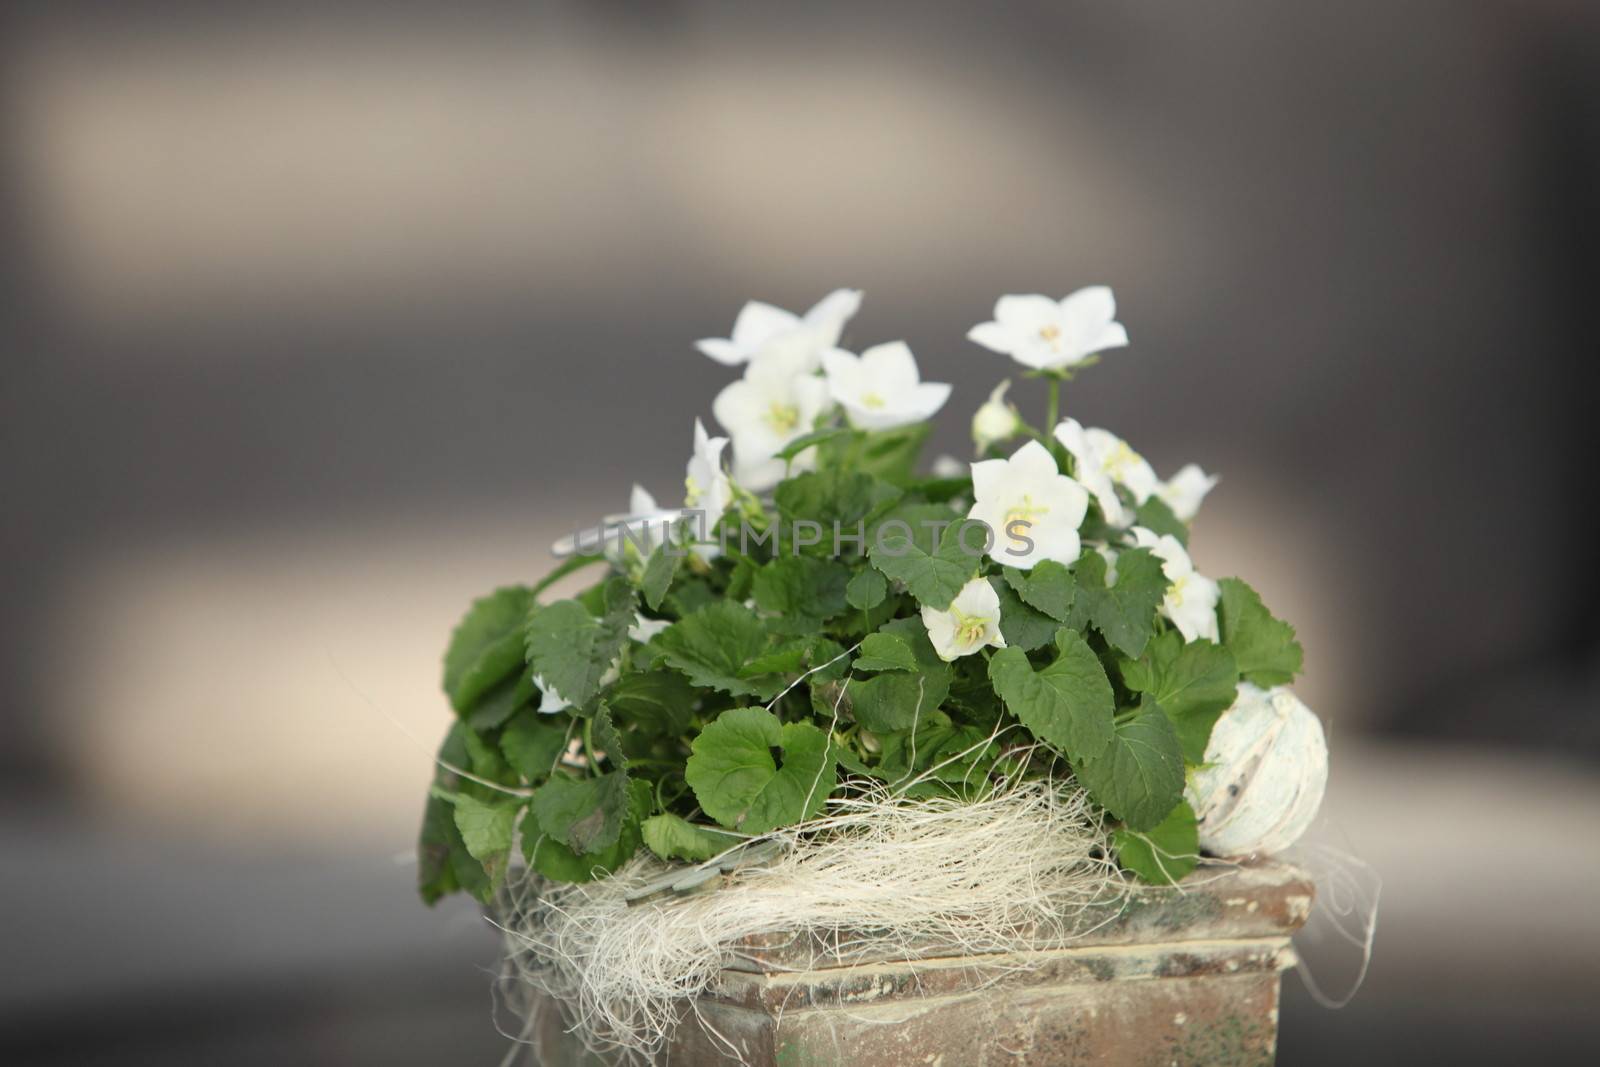 White violets growing in a container by Farina6000